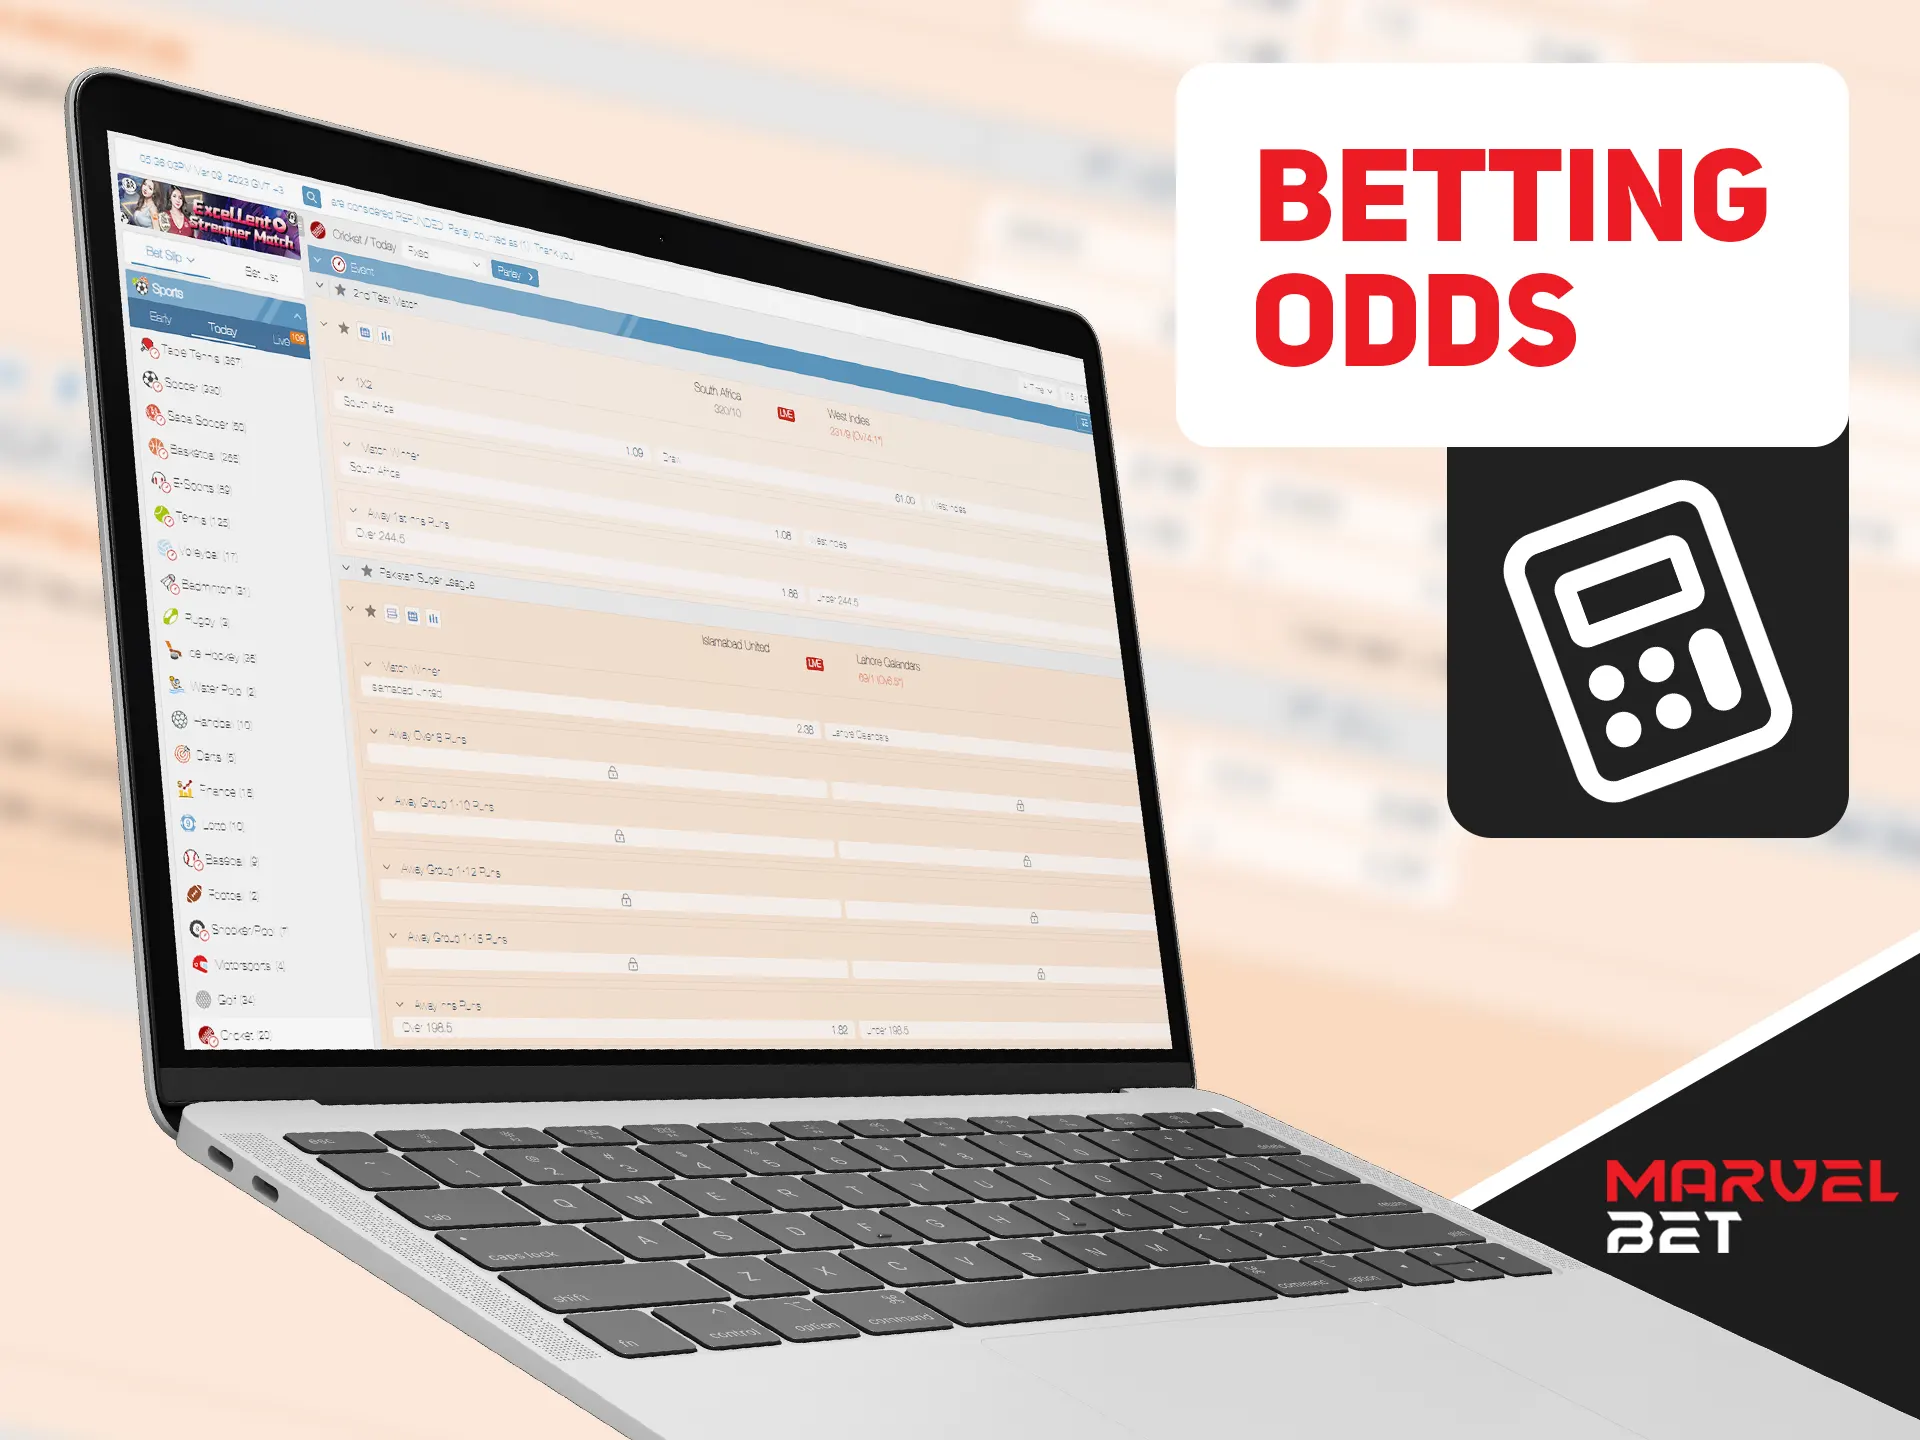 Calculate odds on special Marvelbet page.